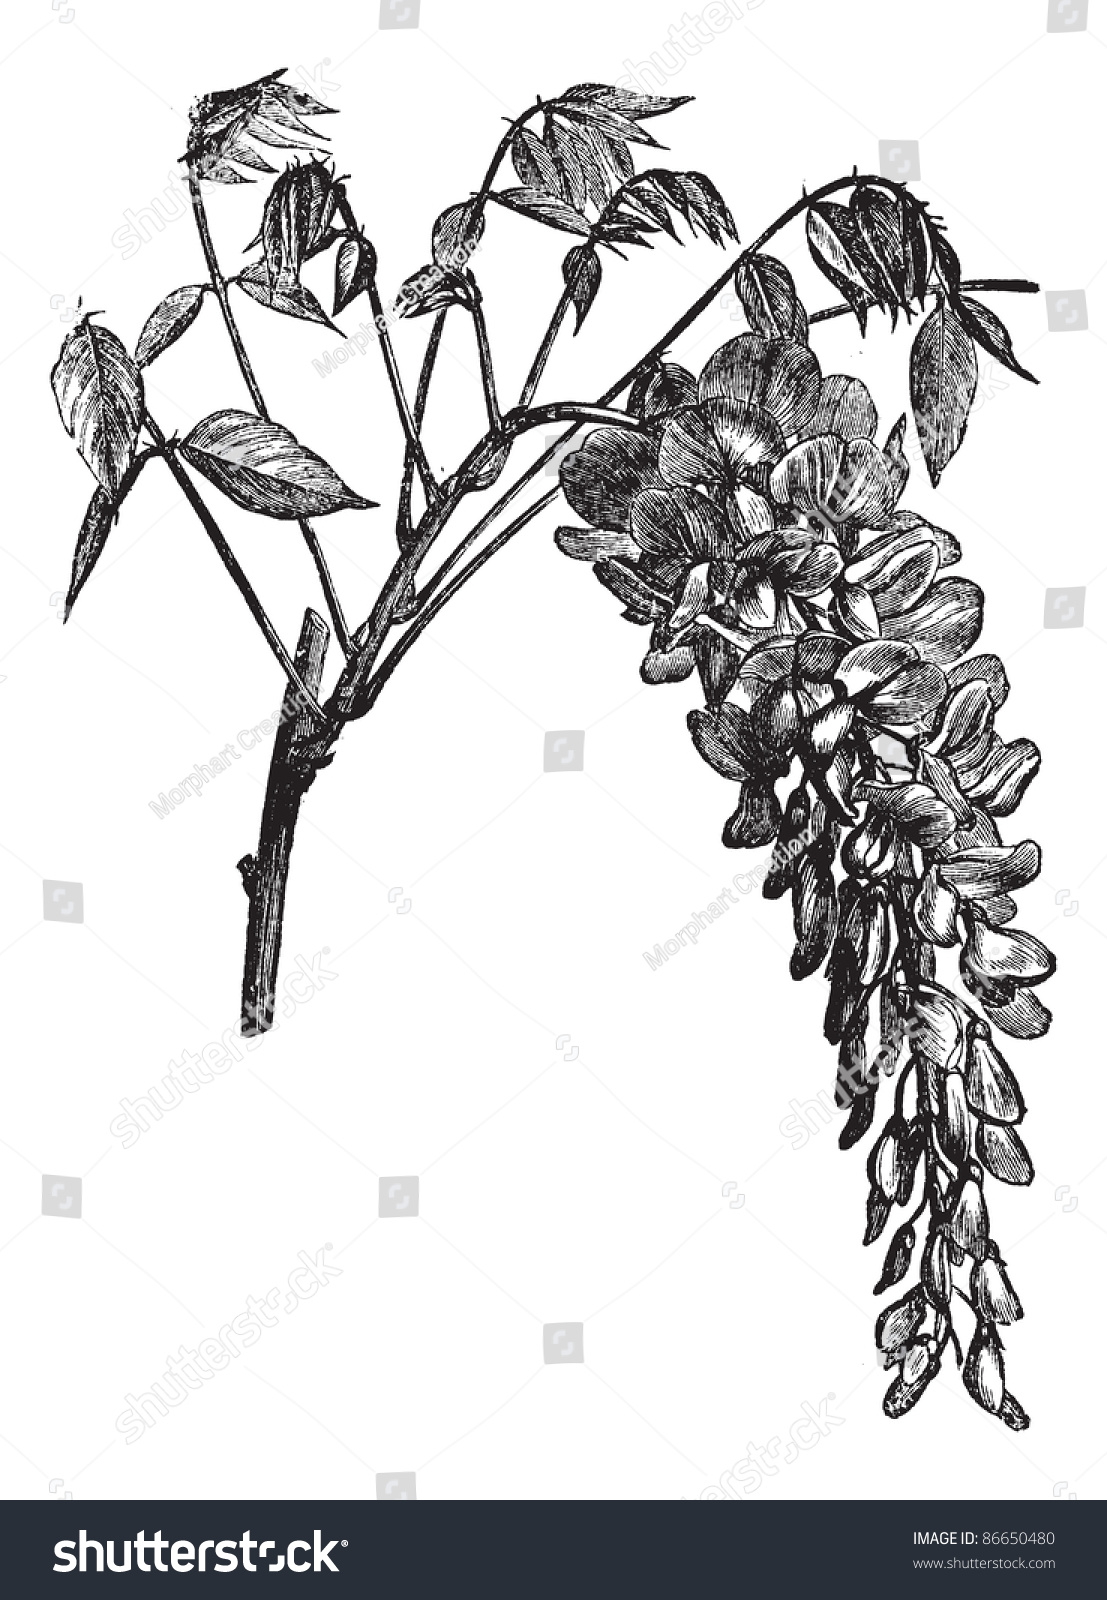 SVG of Wisteria sinensis or Chinese Wisteria, vintage engraving. Old engraved illustration of Wisteria sinensis isolated on a white background. Trousset encyclopedia (1886 - 1891). svg